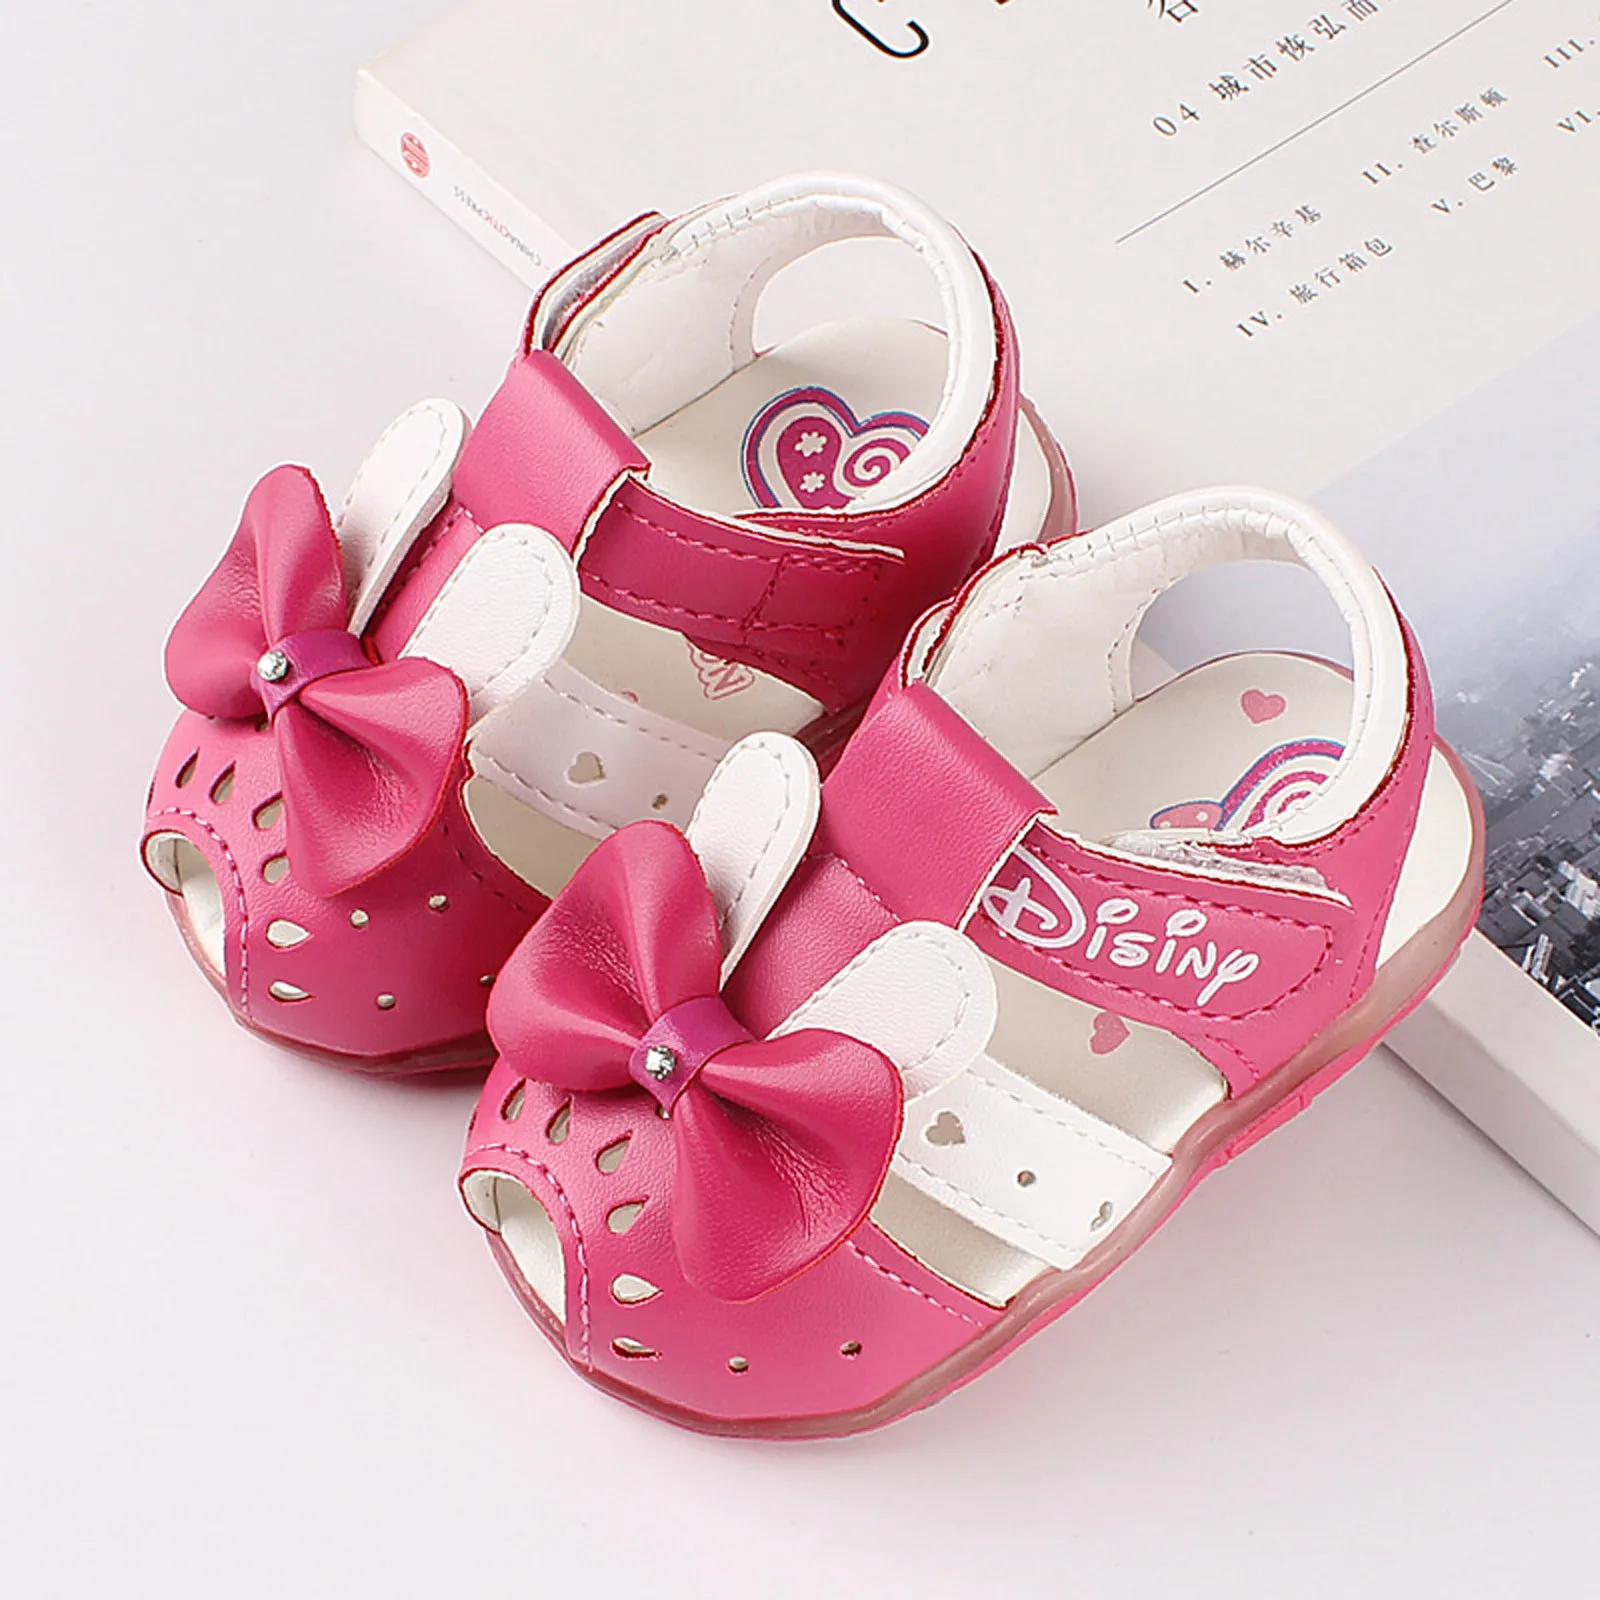 Toddler Baby Girls Kids LED Shoes 1-6 Years Old Zip Crystal Bowknot Luminous Sneakers Casual Sport Walking Shoes